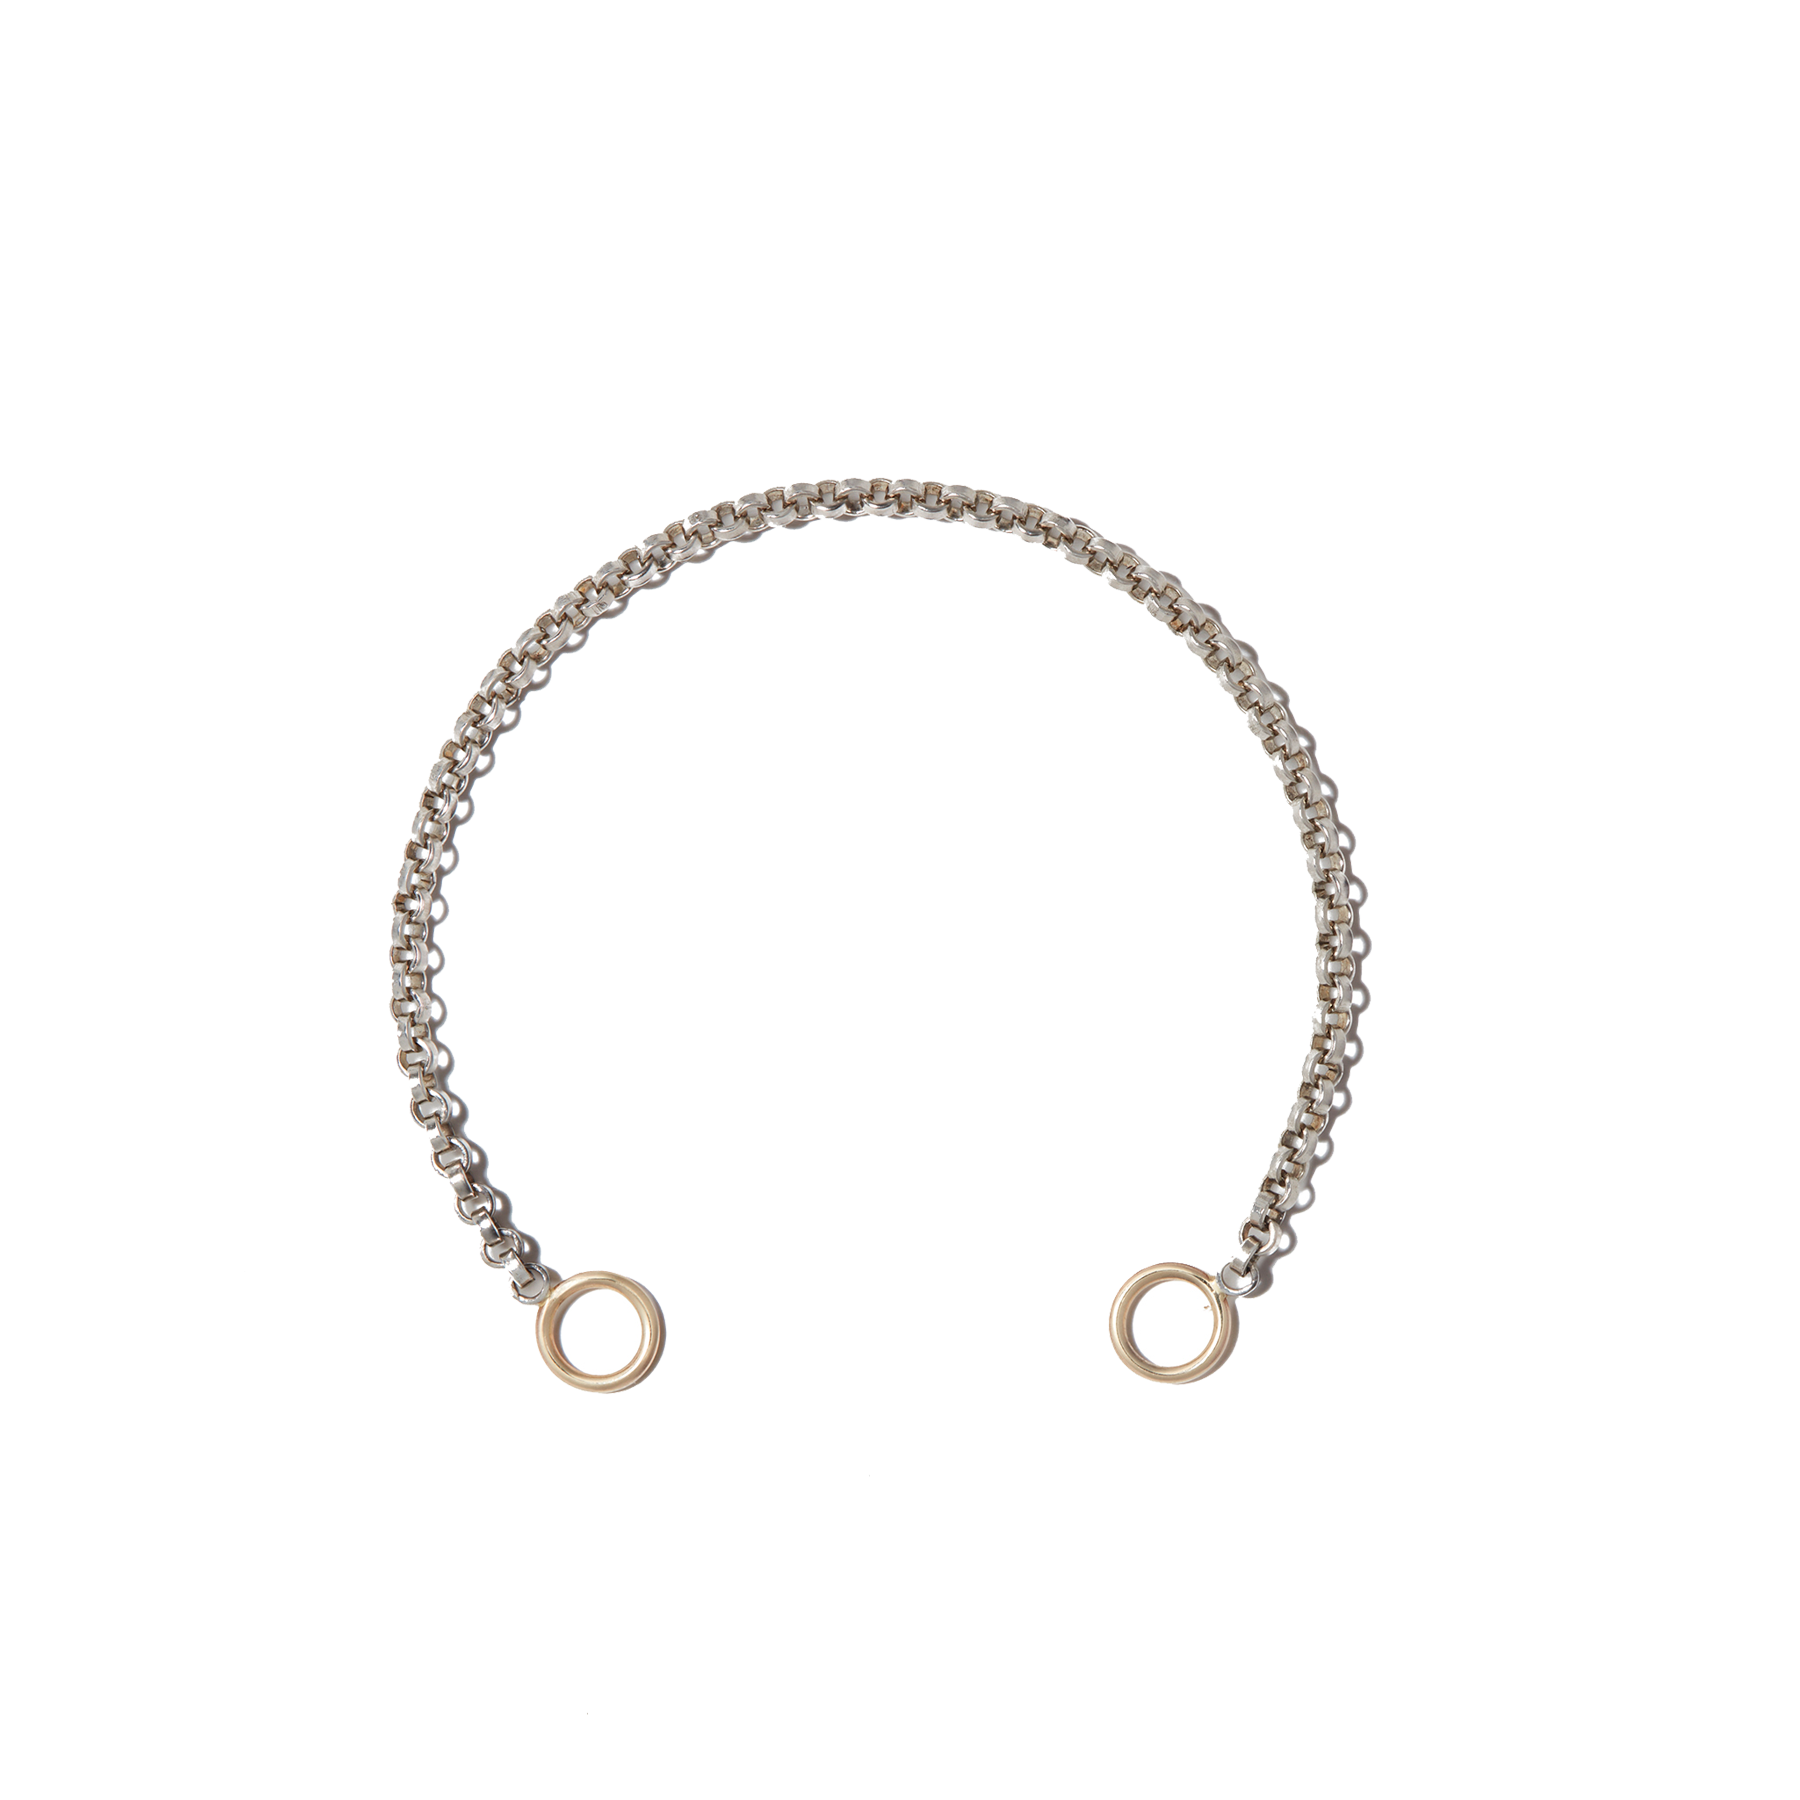 Silver rolo chain bracelet with gold loops against white backdrop